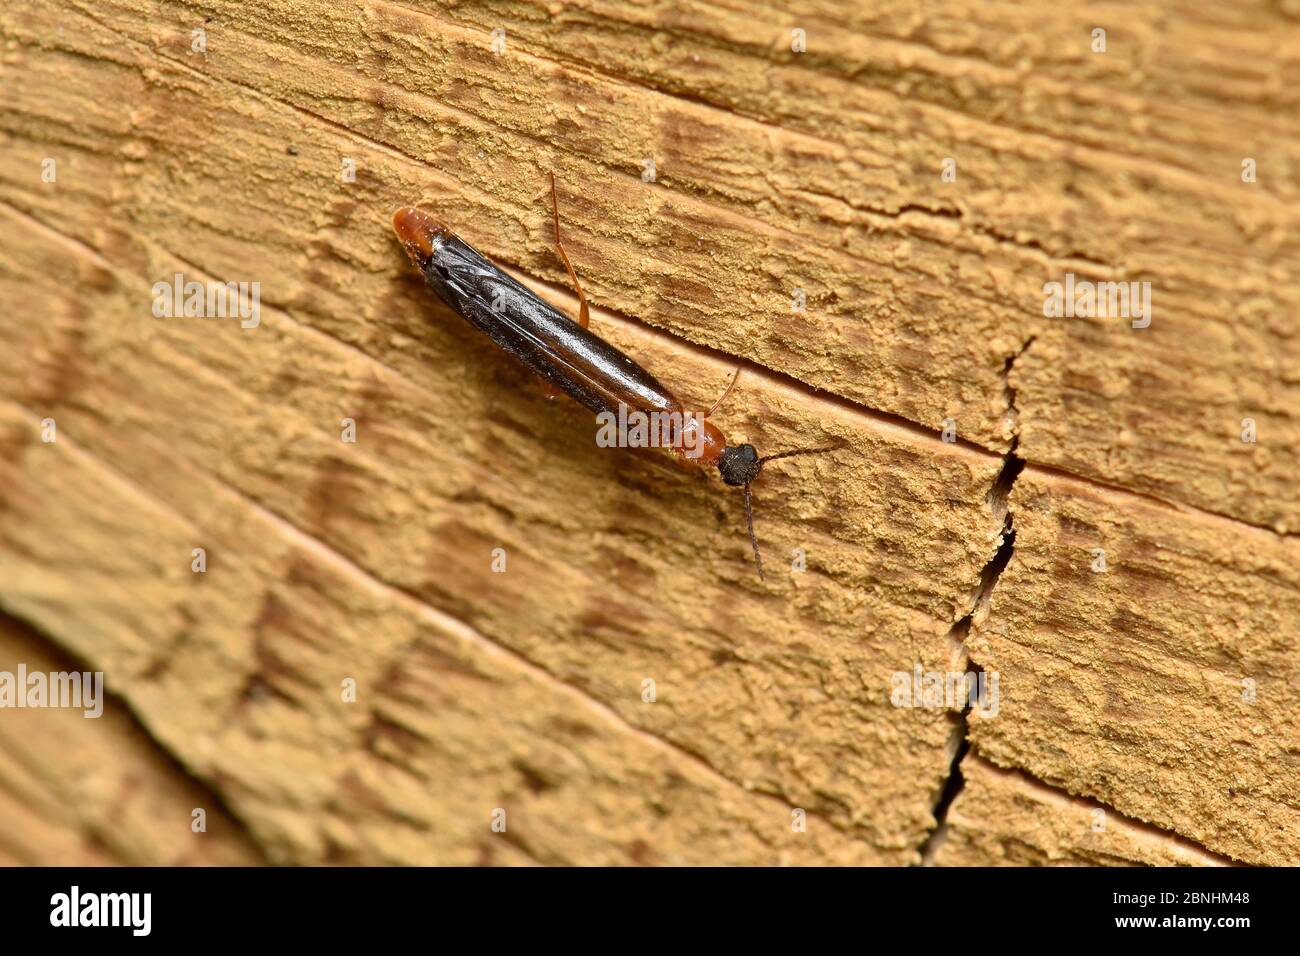 Ship timber beetle (Lymexylon navale) extremely slender beetle that allows it to get into cracks in timber to lay eggs, Surrey, England, UK, June. Stock Photo